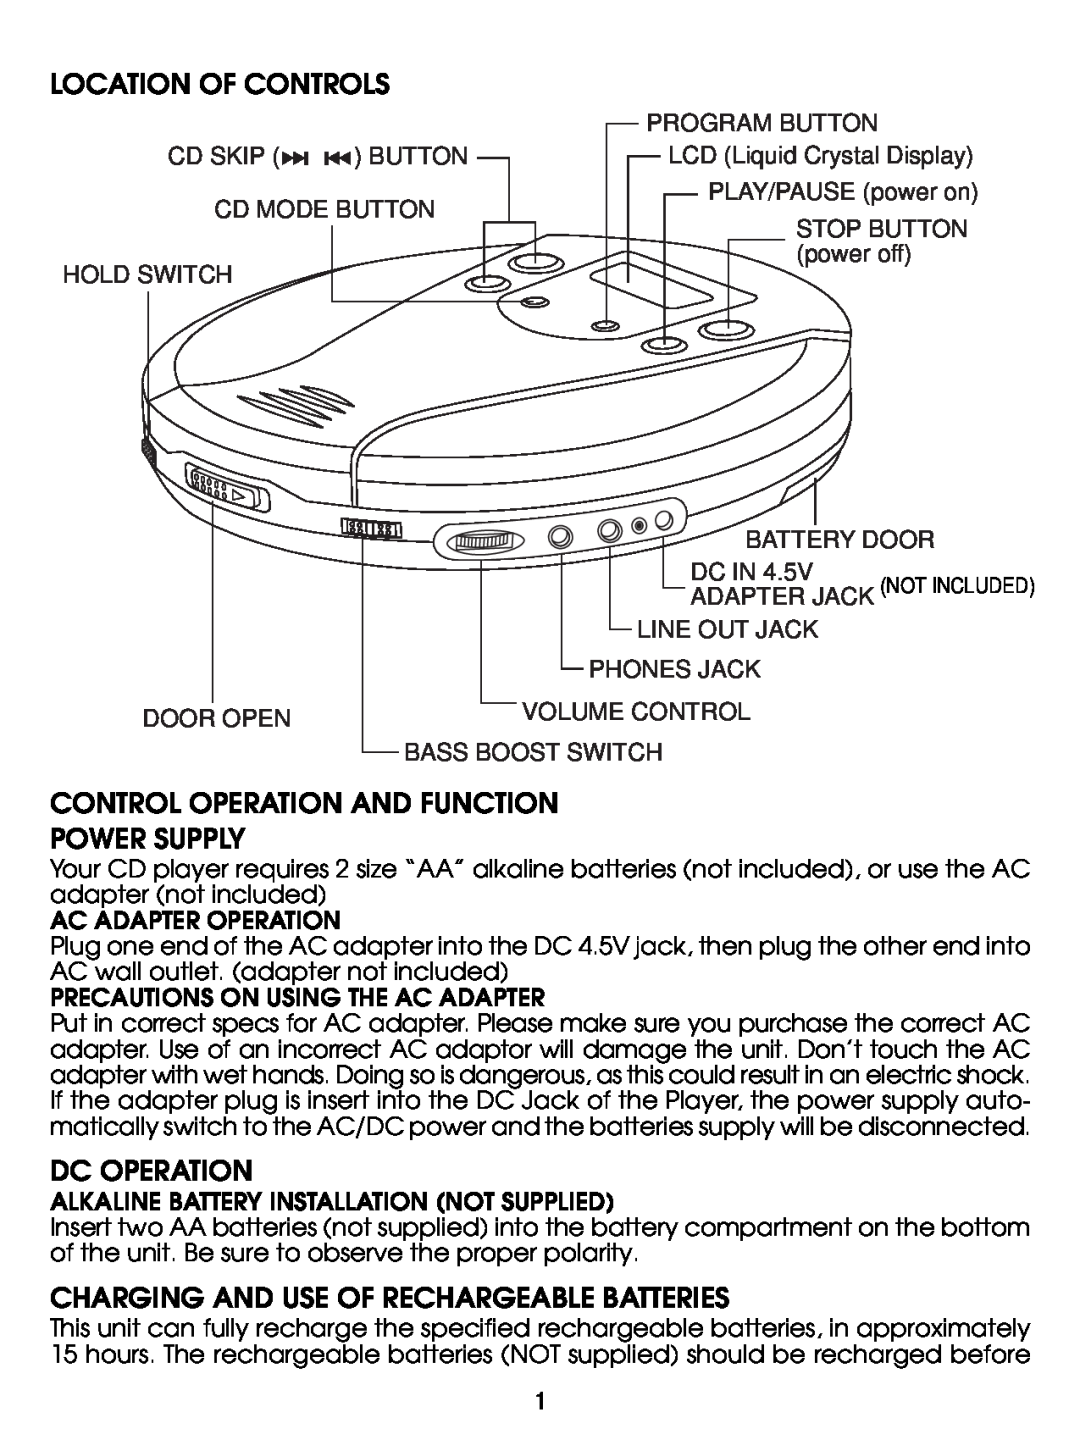 Jwin JX-CD280 instruction manual Location Of Controls, Control Operation And Function Power Supply, Dc Operation 